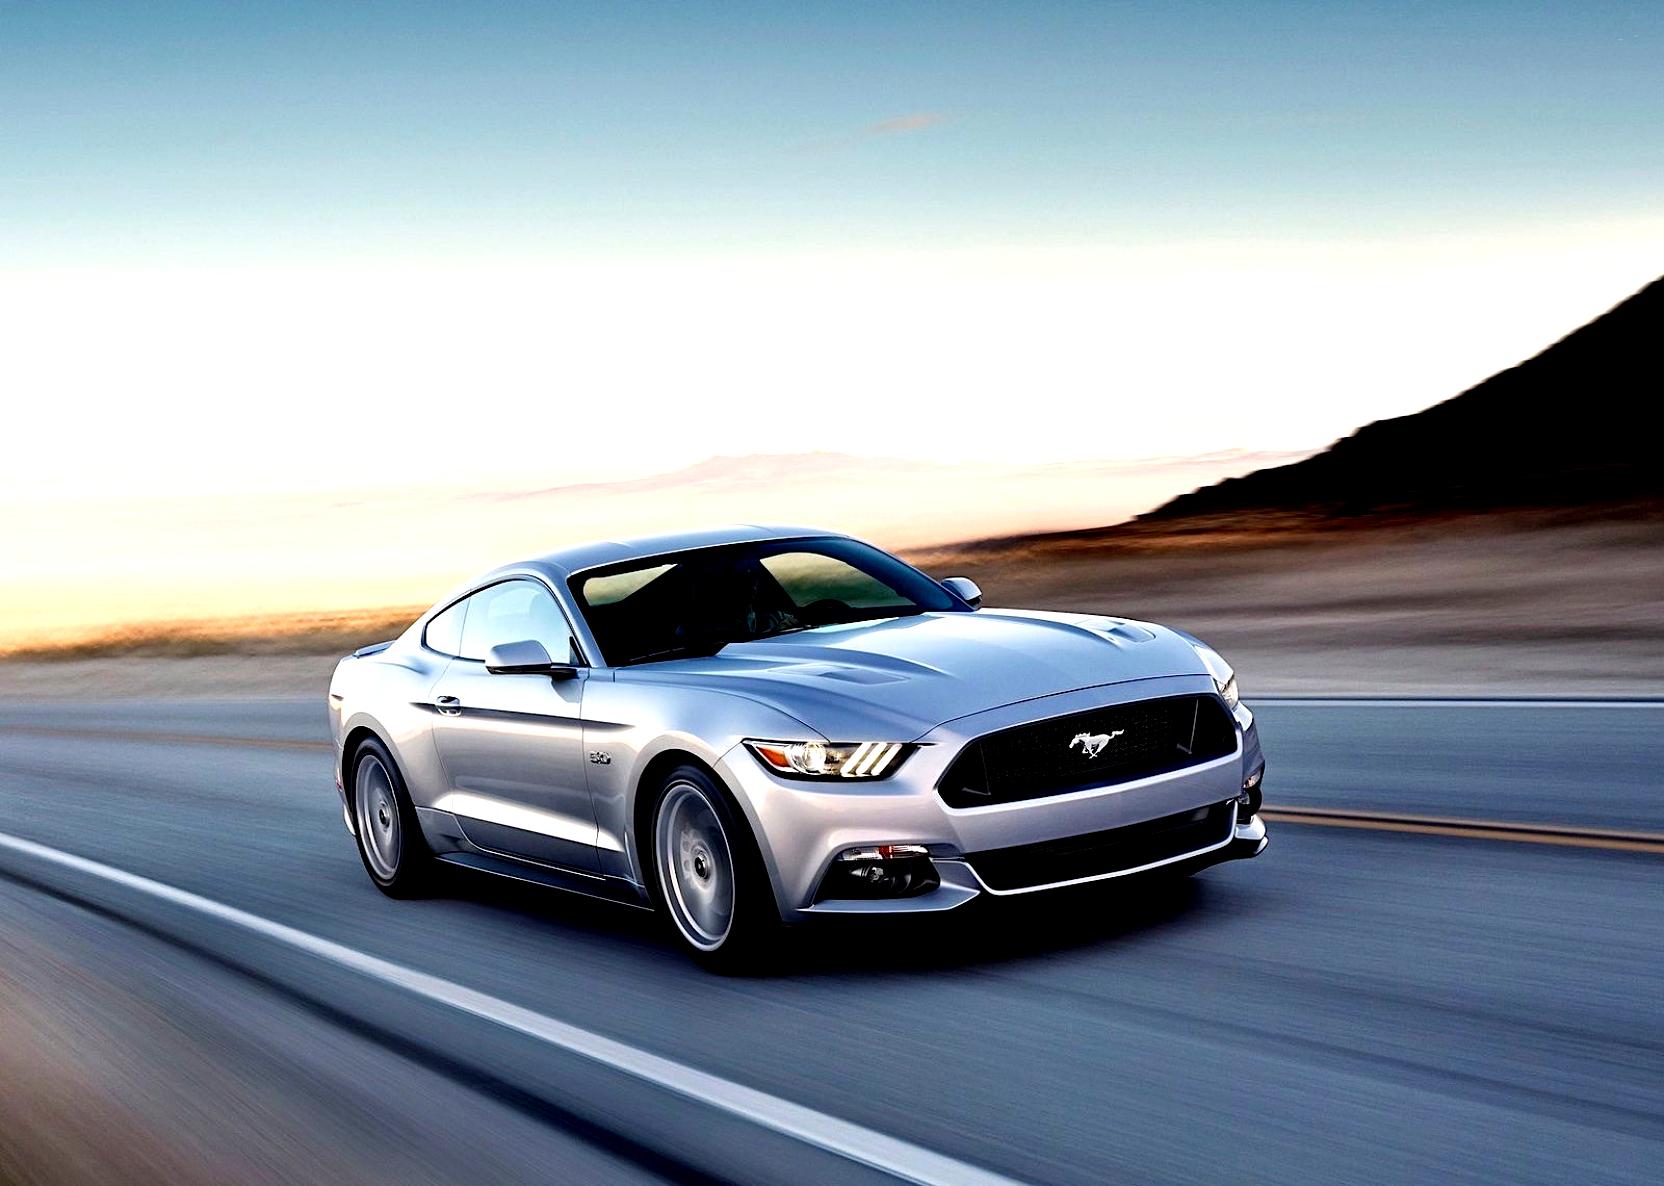 Ford Mustang 2014 #50